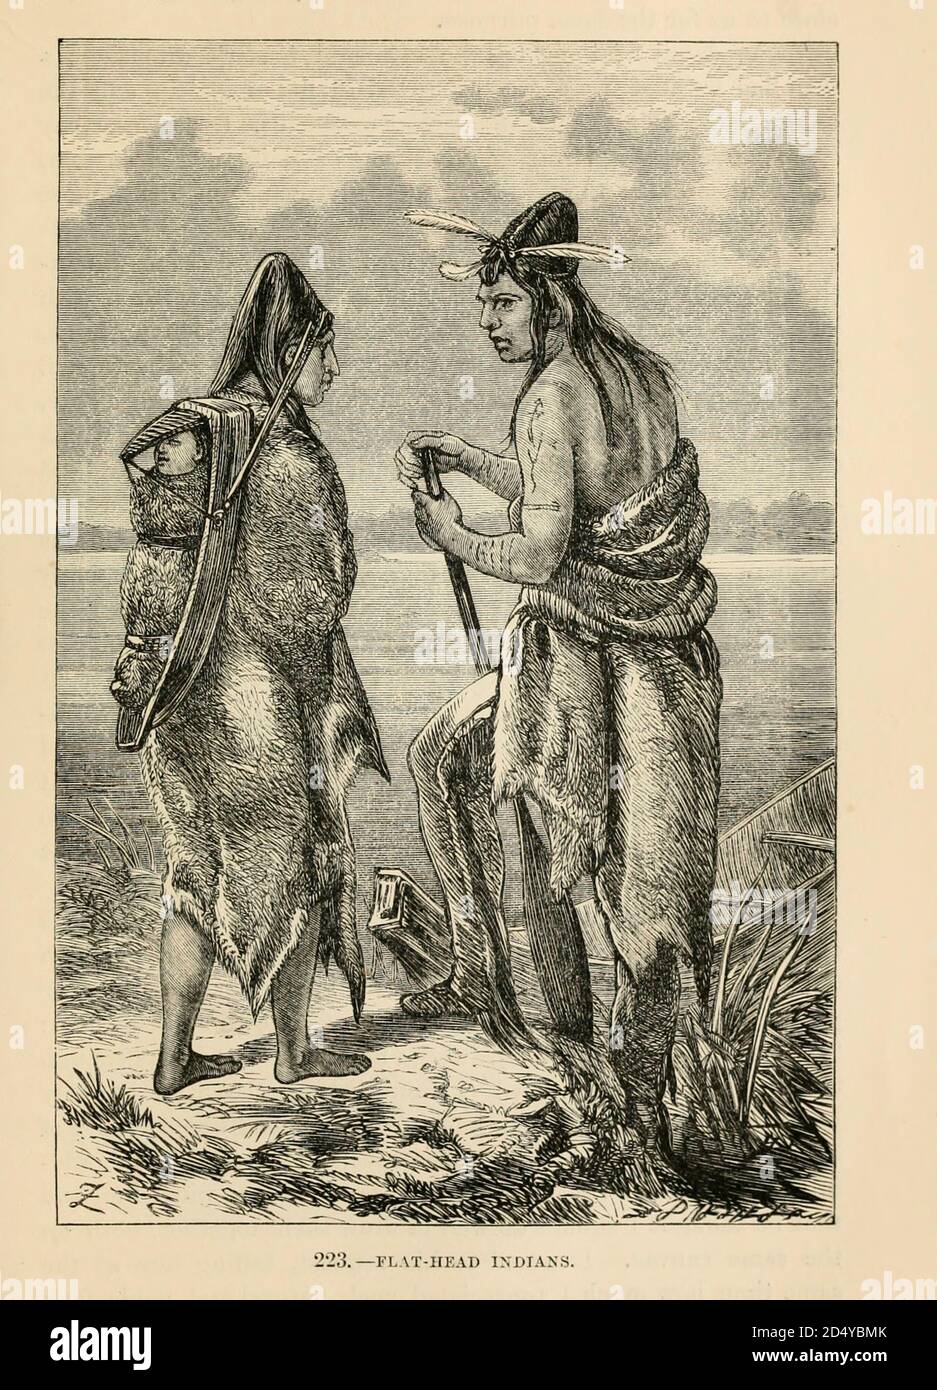 Flat-Head Indians engraving on wood From The human race by Figuier, Louis, (1819-1894) Publication in 1872 Publisher: New York, Appleton Stock Photo